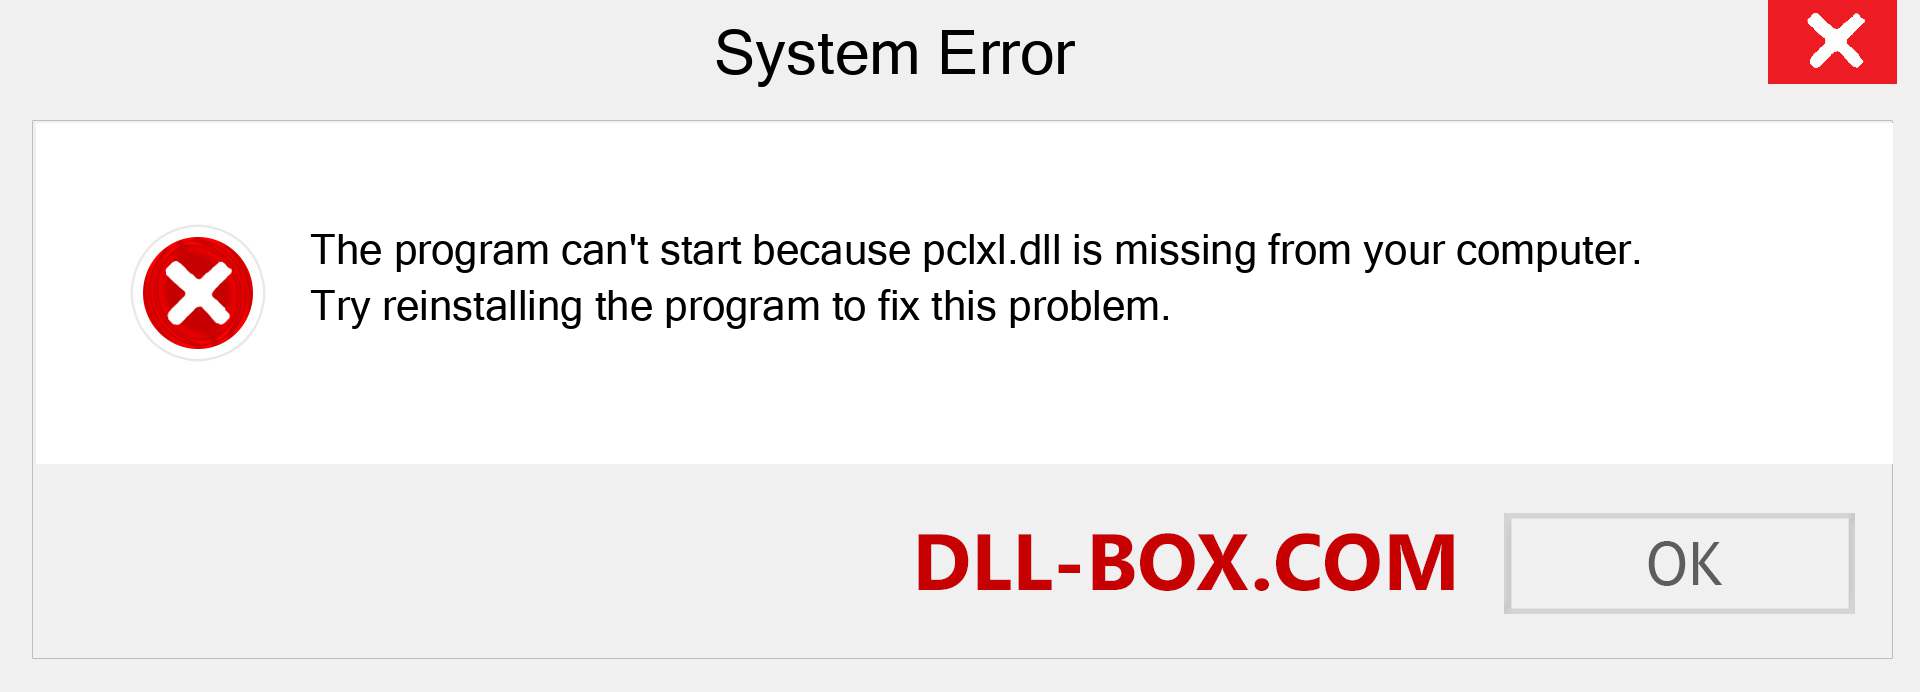  pclxl.dll file is missing?. Download for Windows 7, 8, 10 - Fix  pclxl dll Missing Error on Windows, photos, images